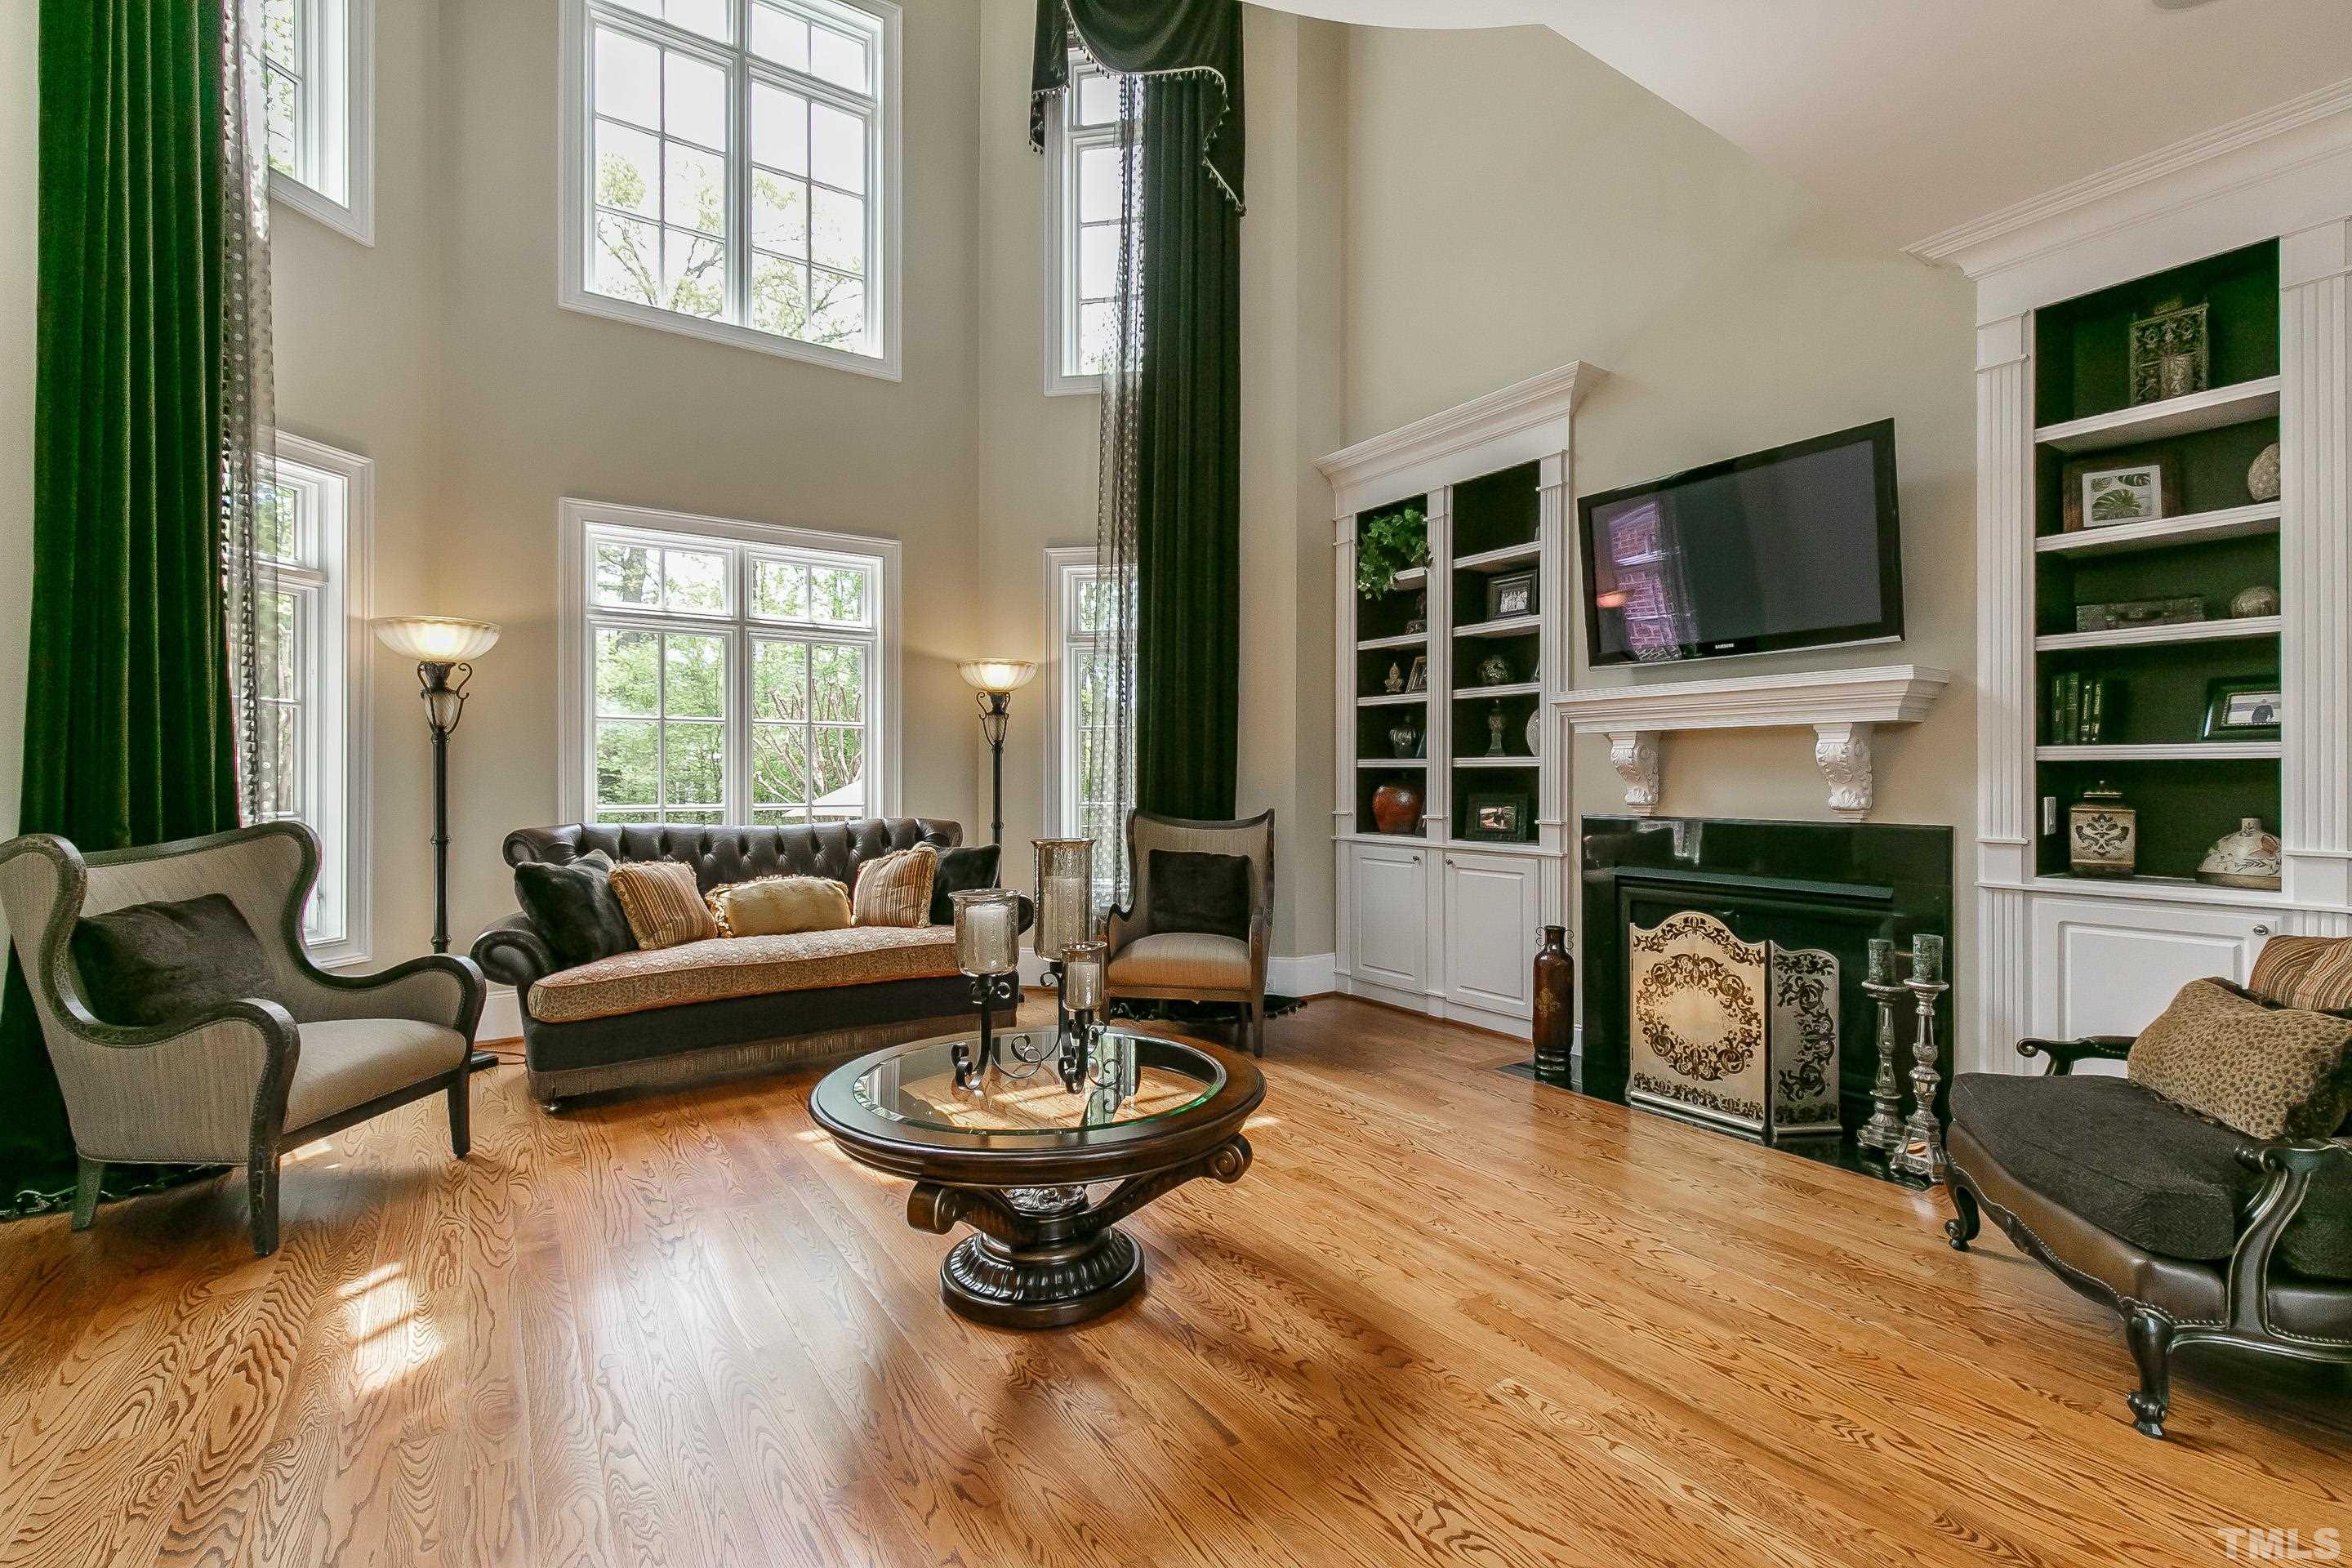 IMPRESSIVE 2 story living room with built-in bookcases/cabinets flanking gas log fireplace